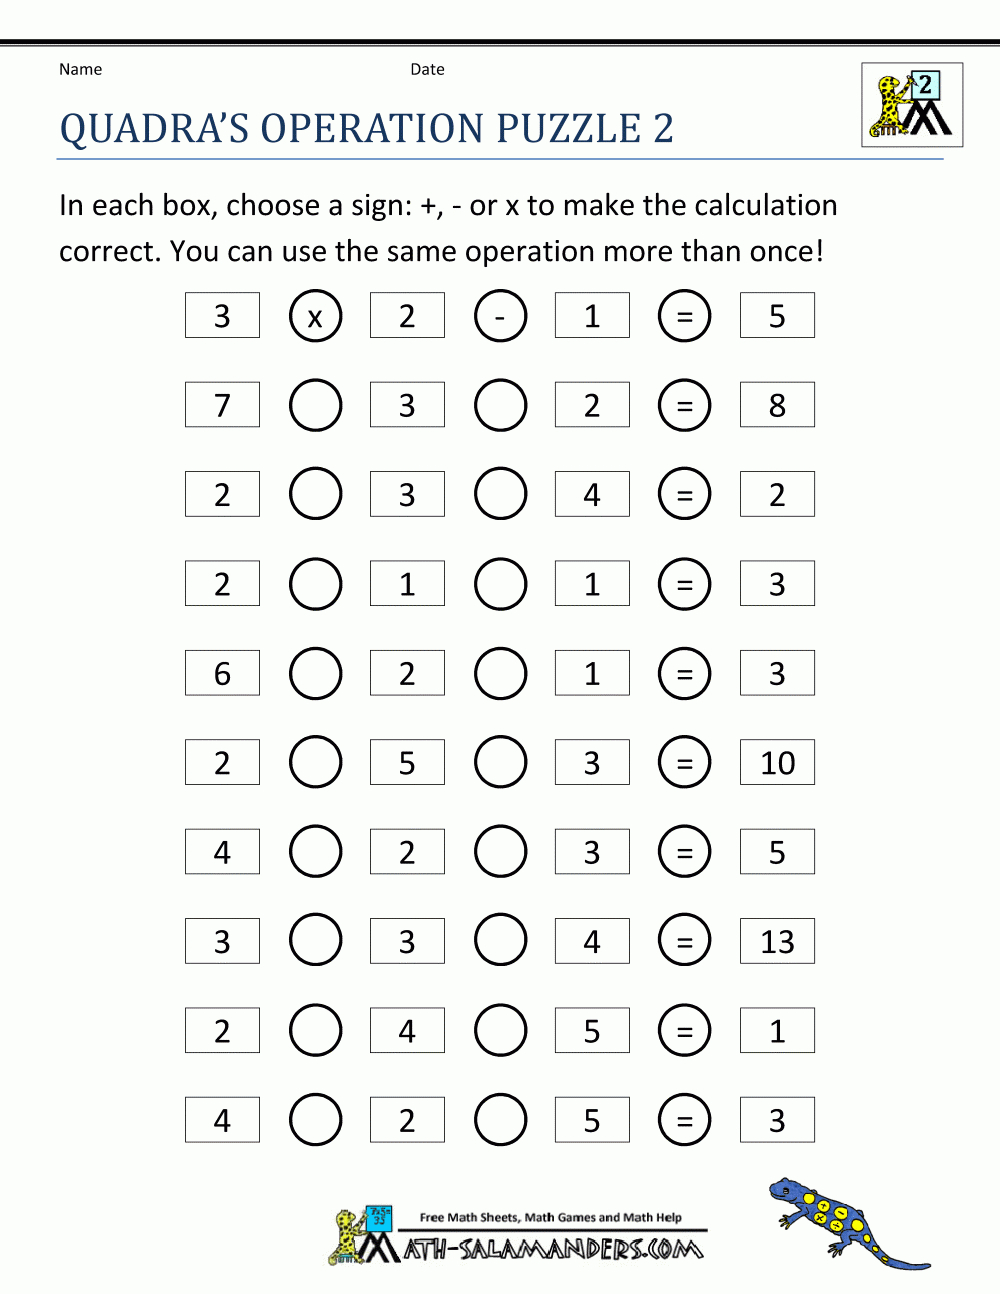 Math Puzzle Quadras Operation Puzzle 2 | Maths | Maths Puzzles, 3Rd - Printable Puzzle Worksheets For Grade 1